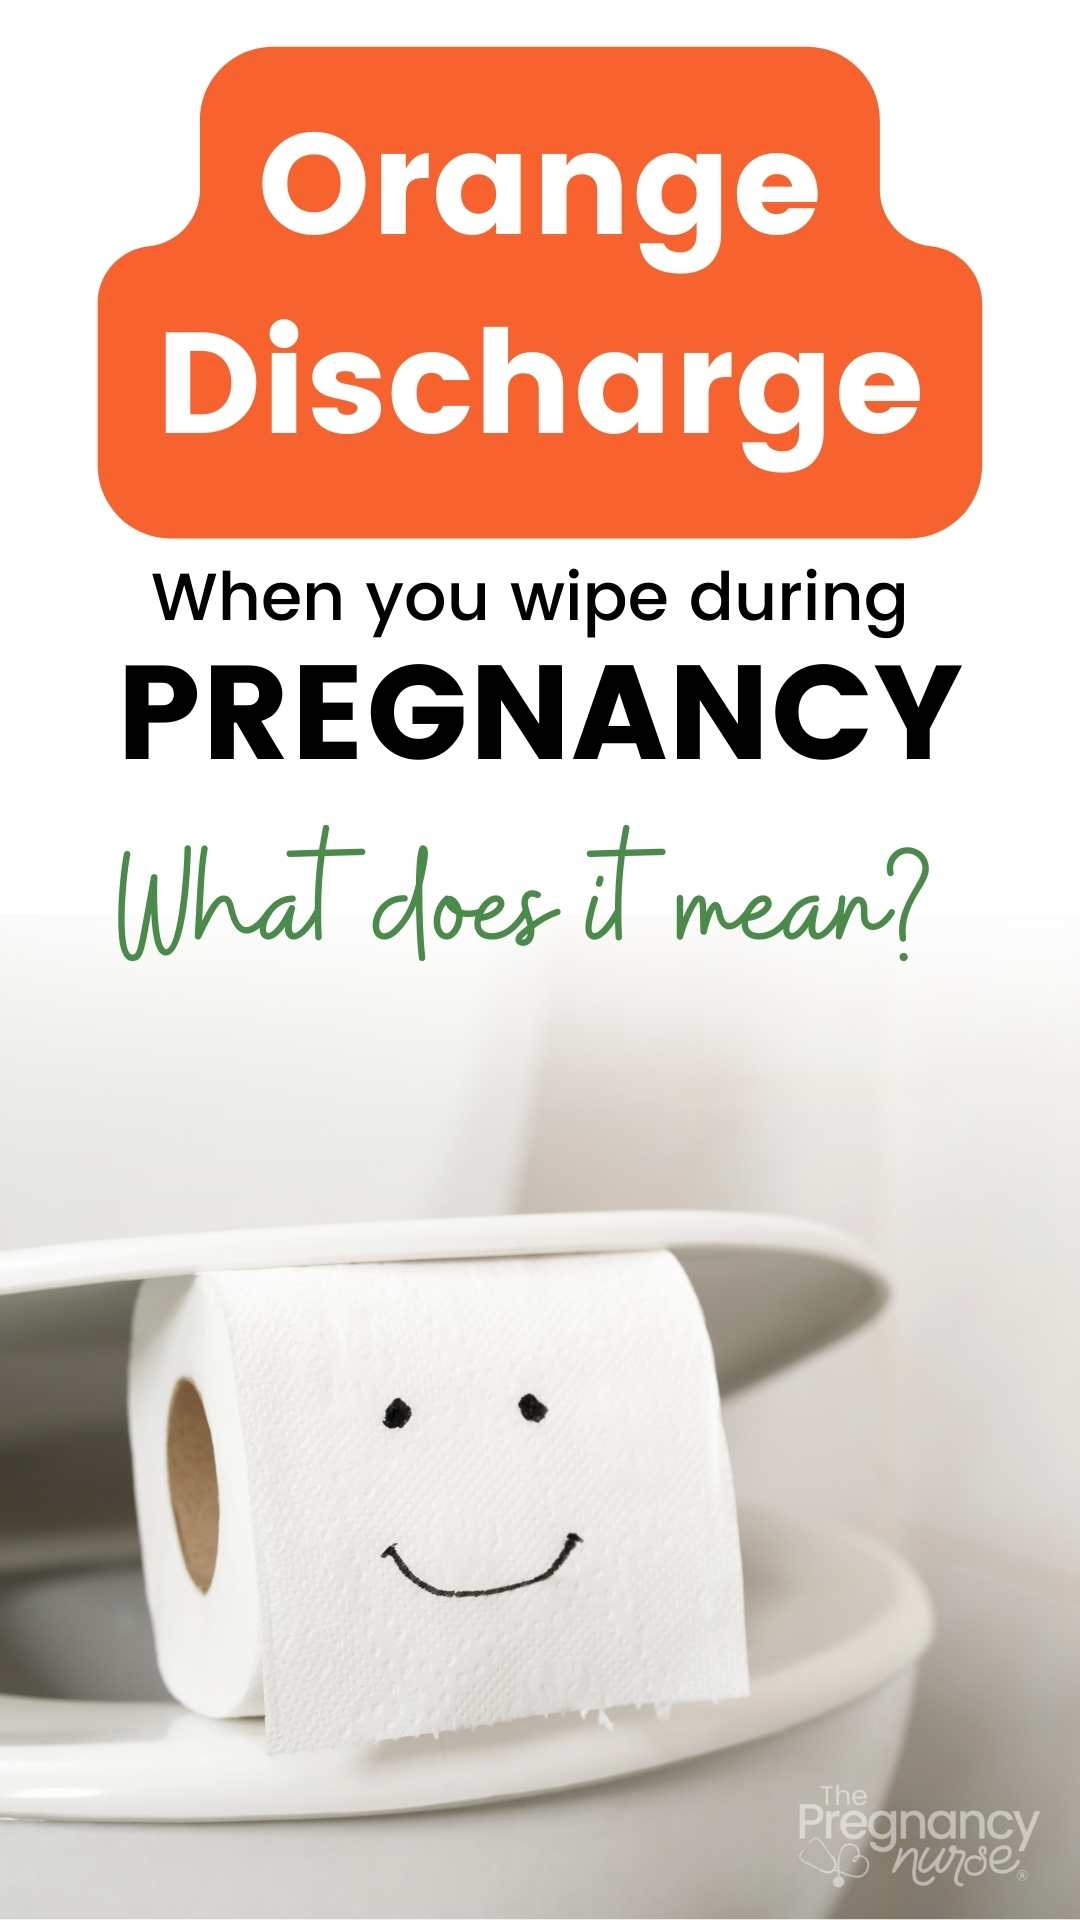 There's a lot of discharge during pregnancy, and it can be confusing. Today we're talking about orange discharge. What could it mean for your pregnancy? If you're worried, always talk to your doctor. But hopefully this article will help put your mind at ease a little bit!